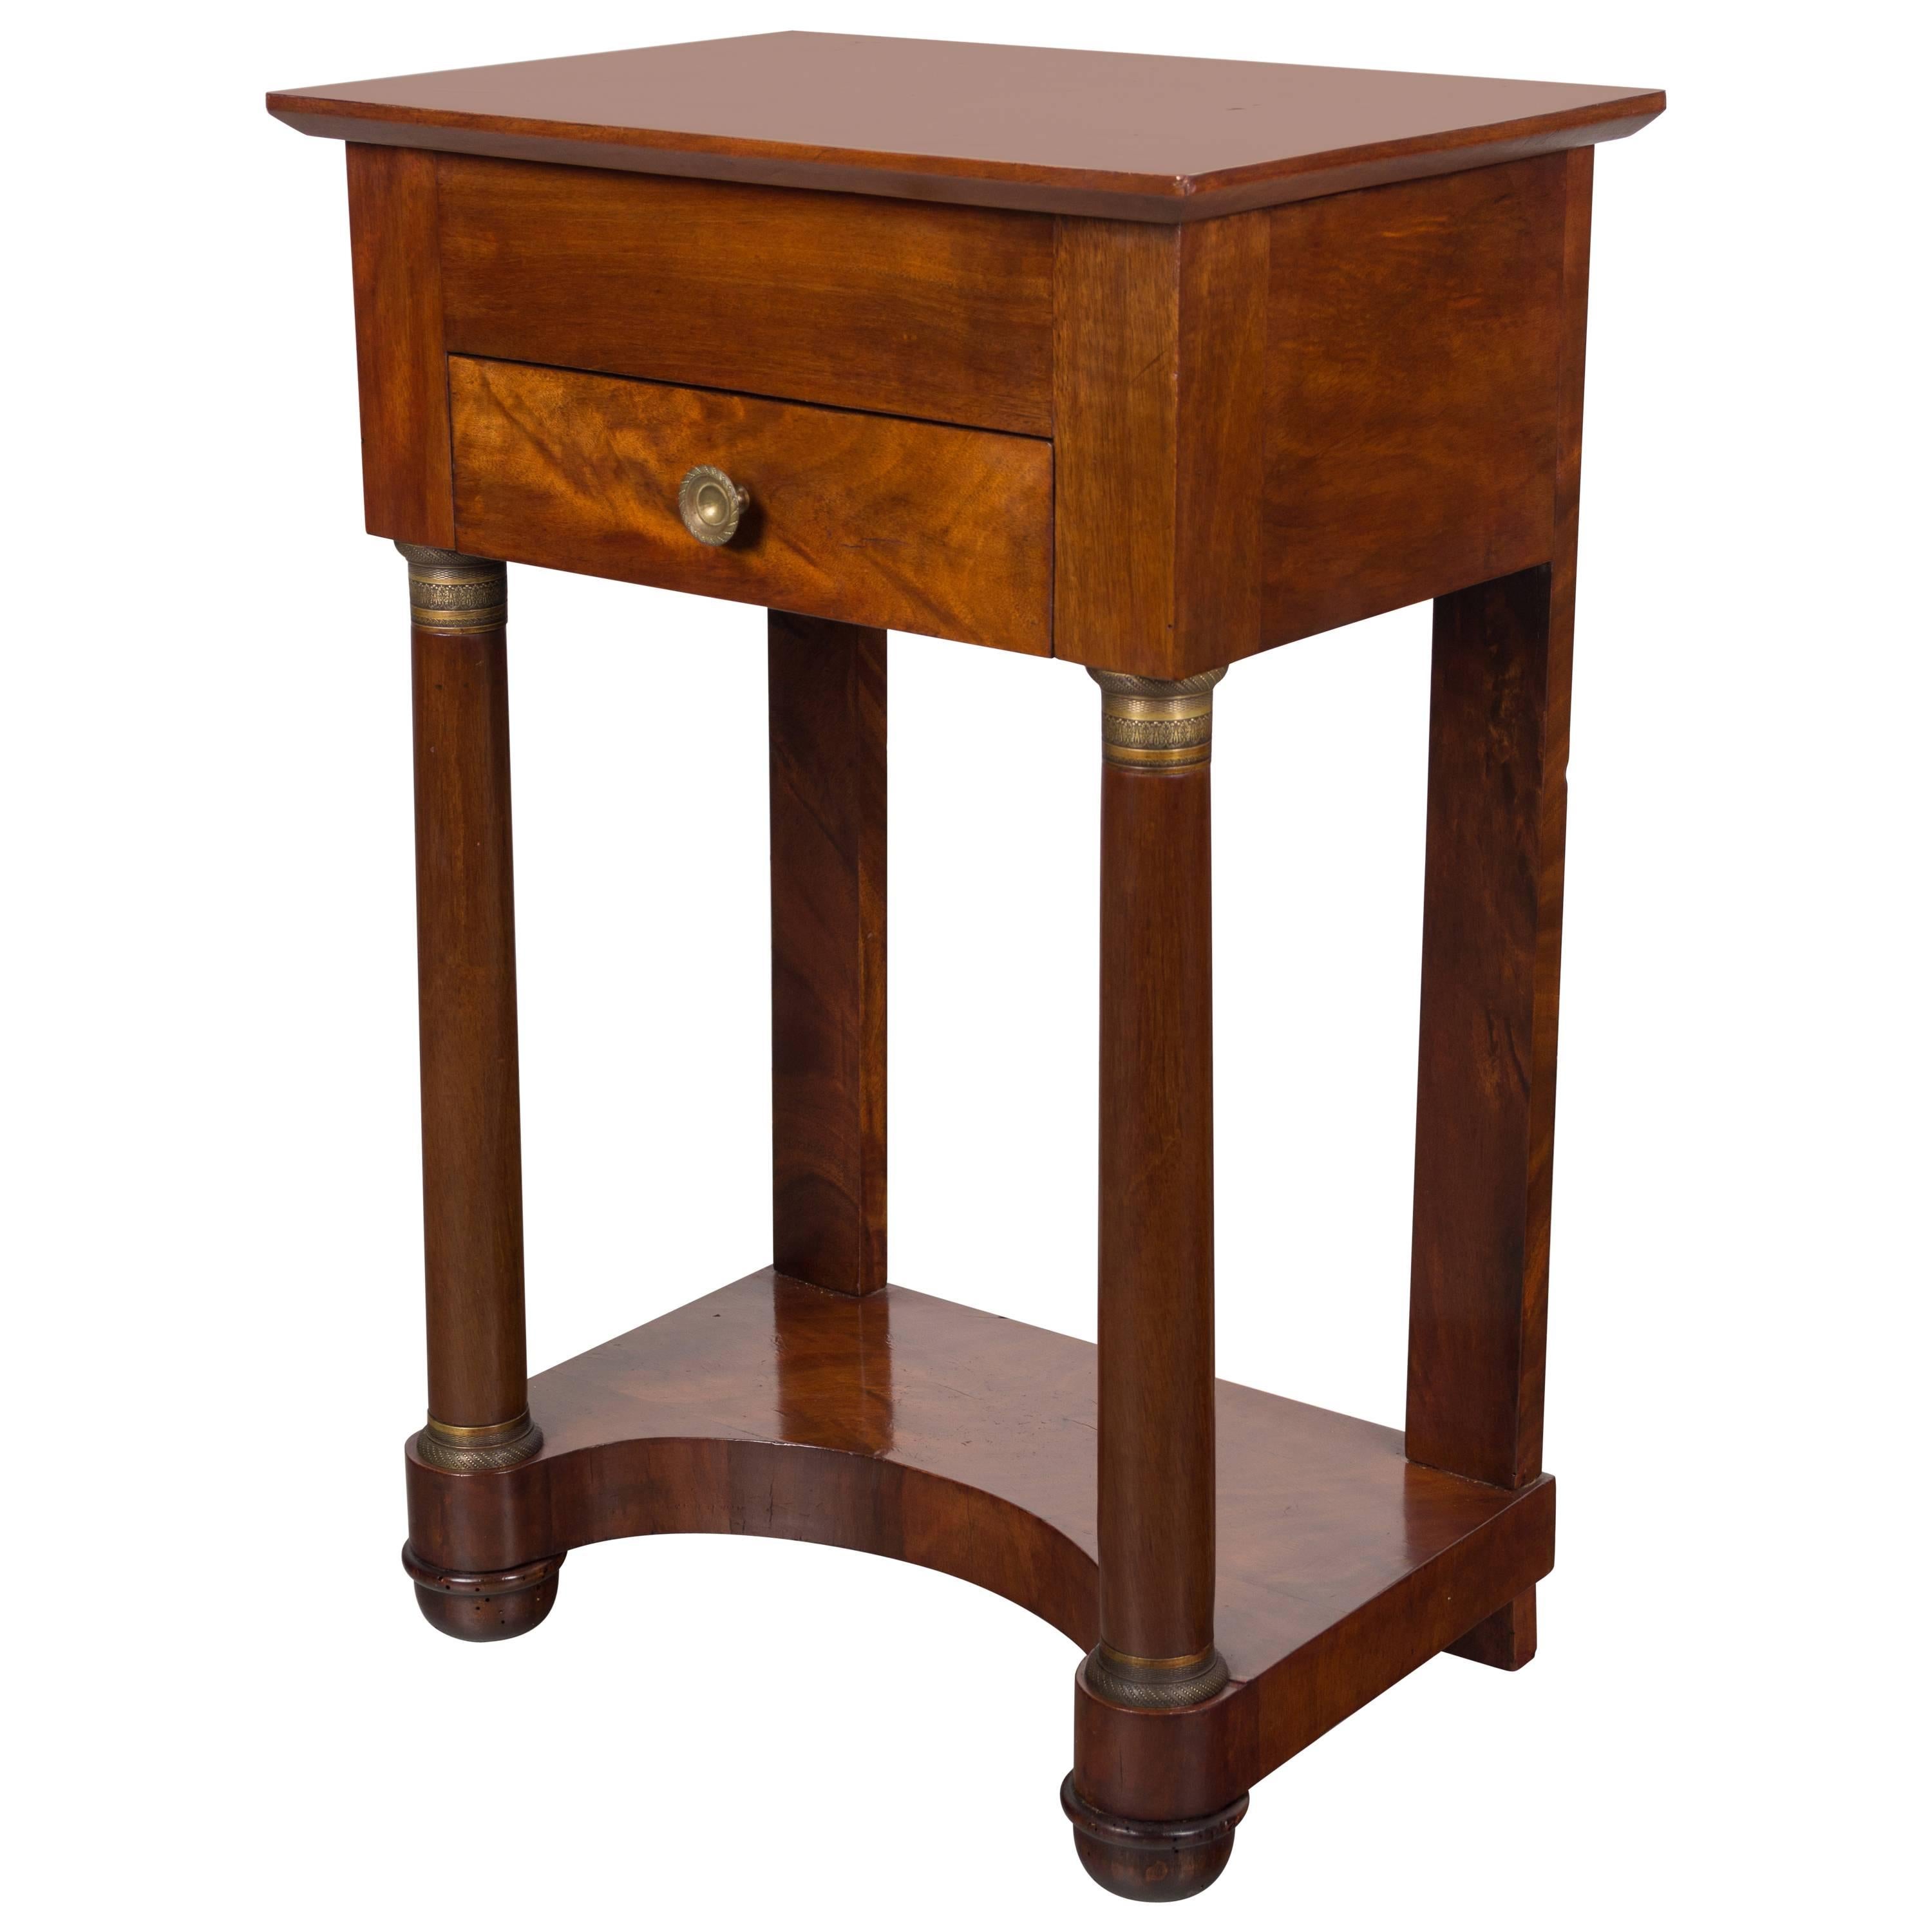 19th Century, French Empire Side Table